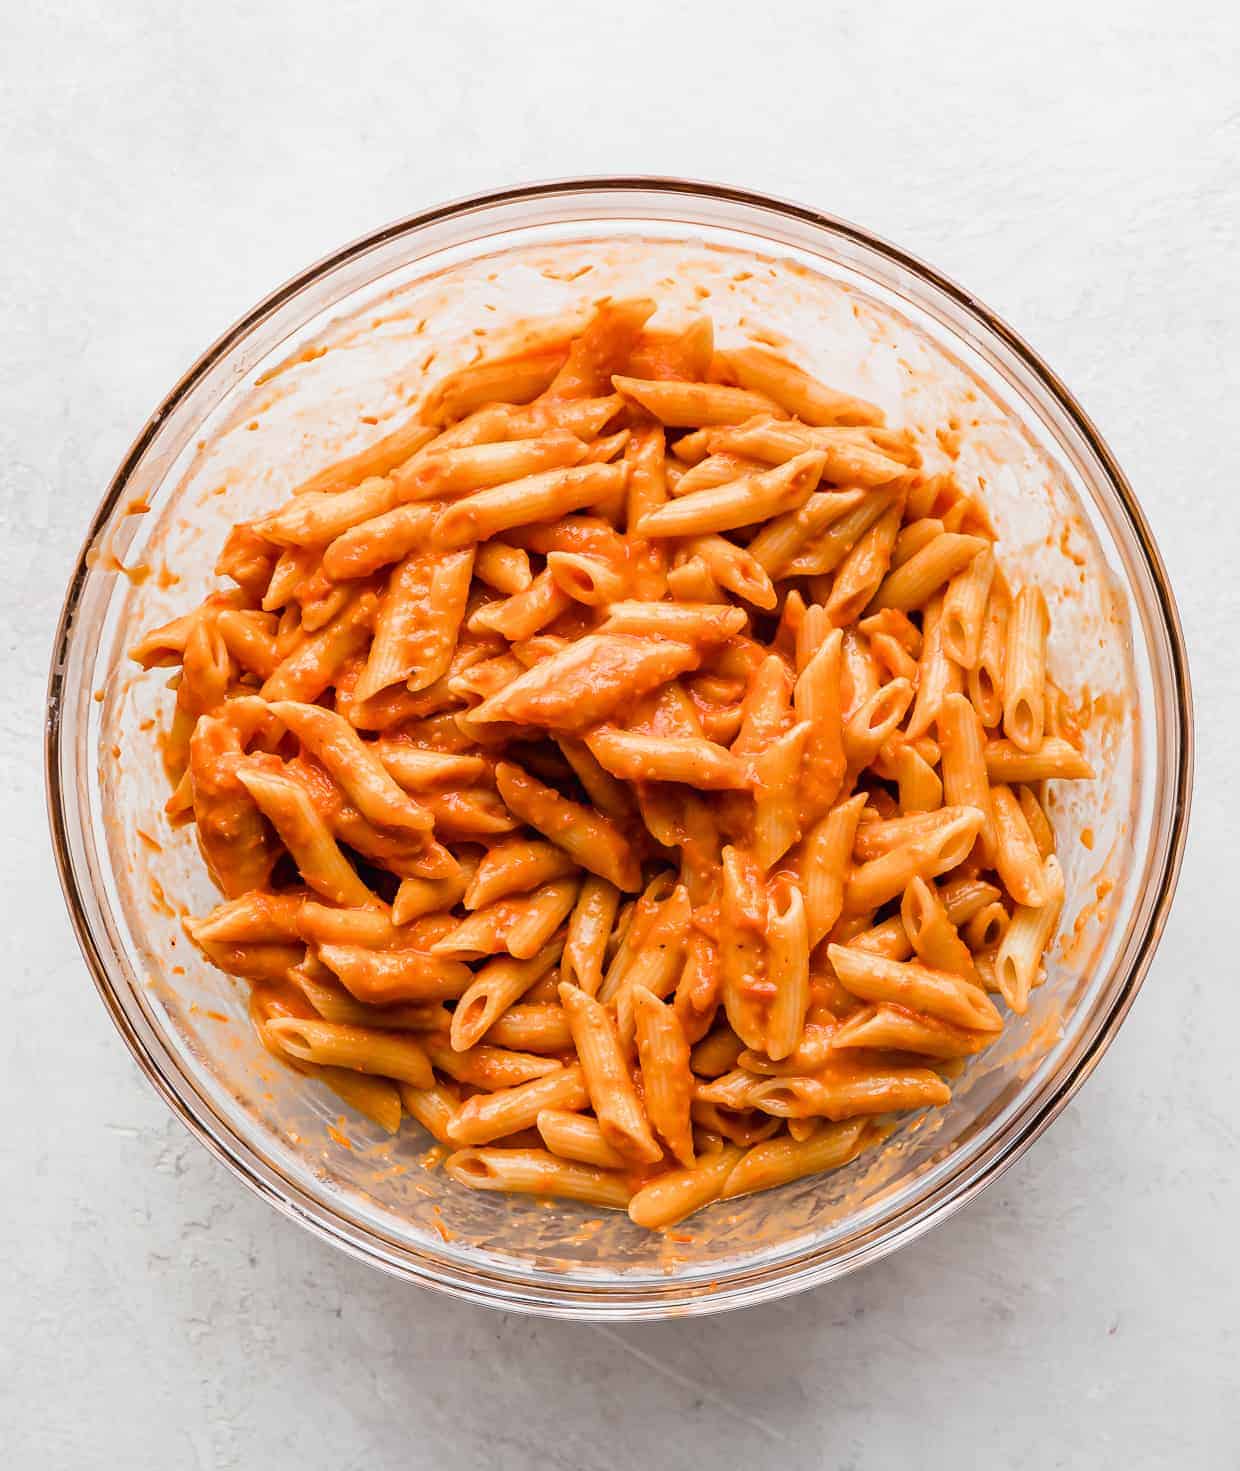 Cooked penne noodles tossed in a red sauce in a glass bowl.